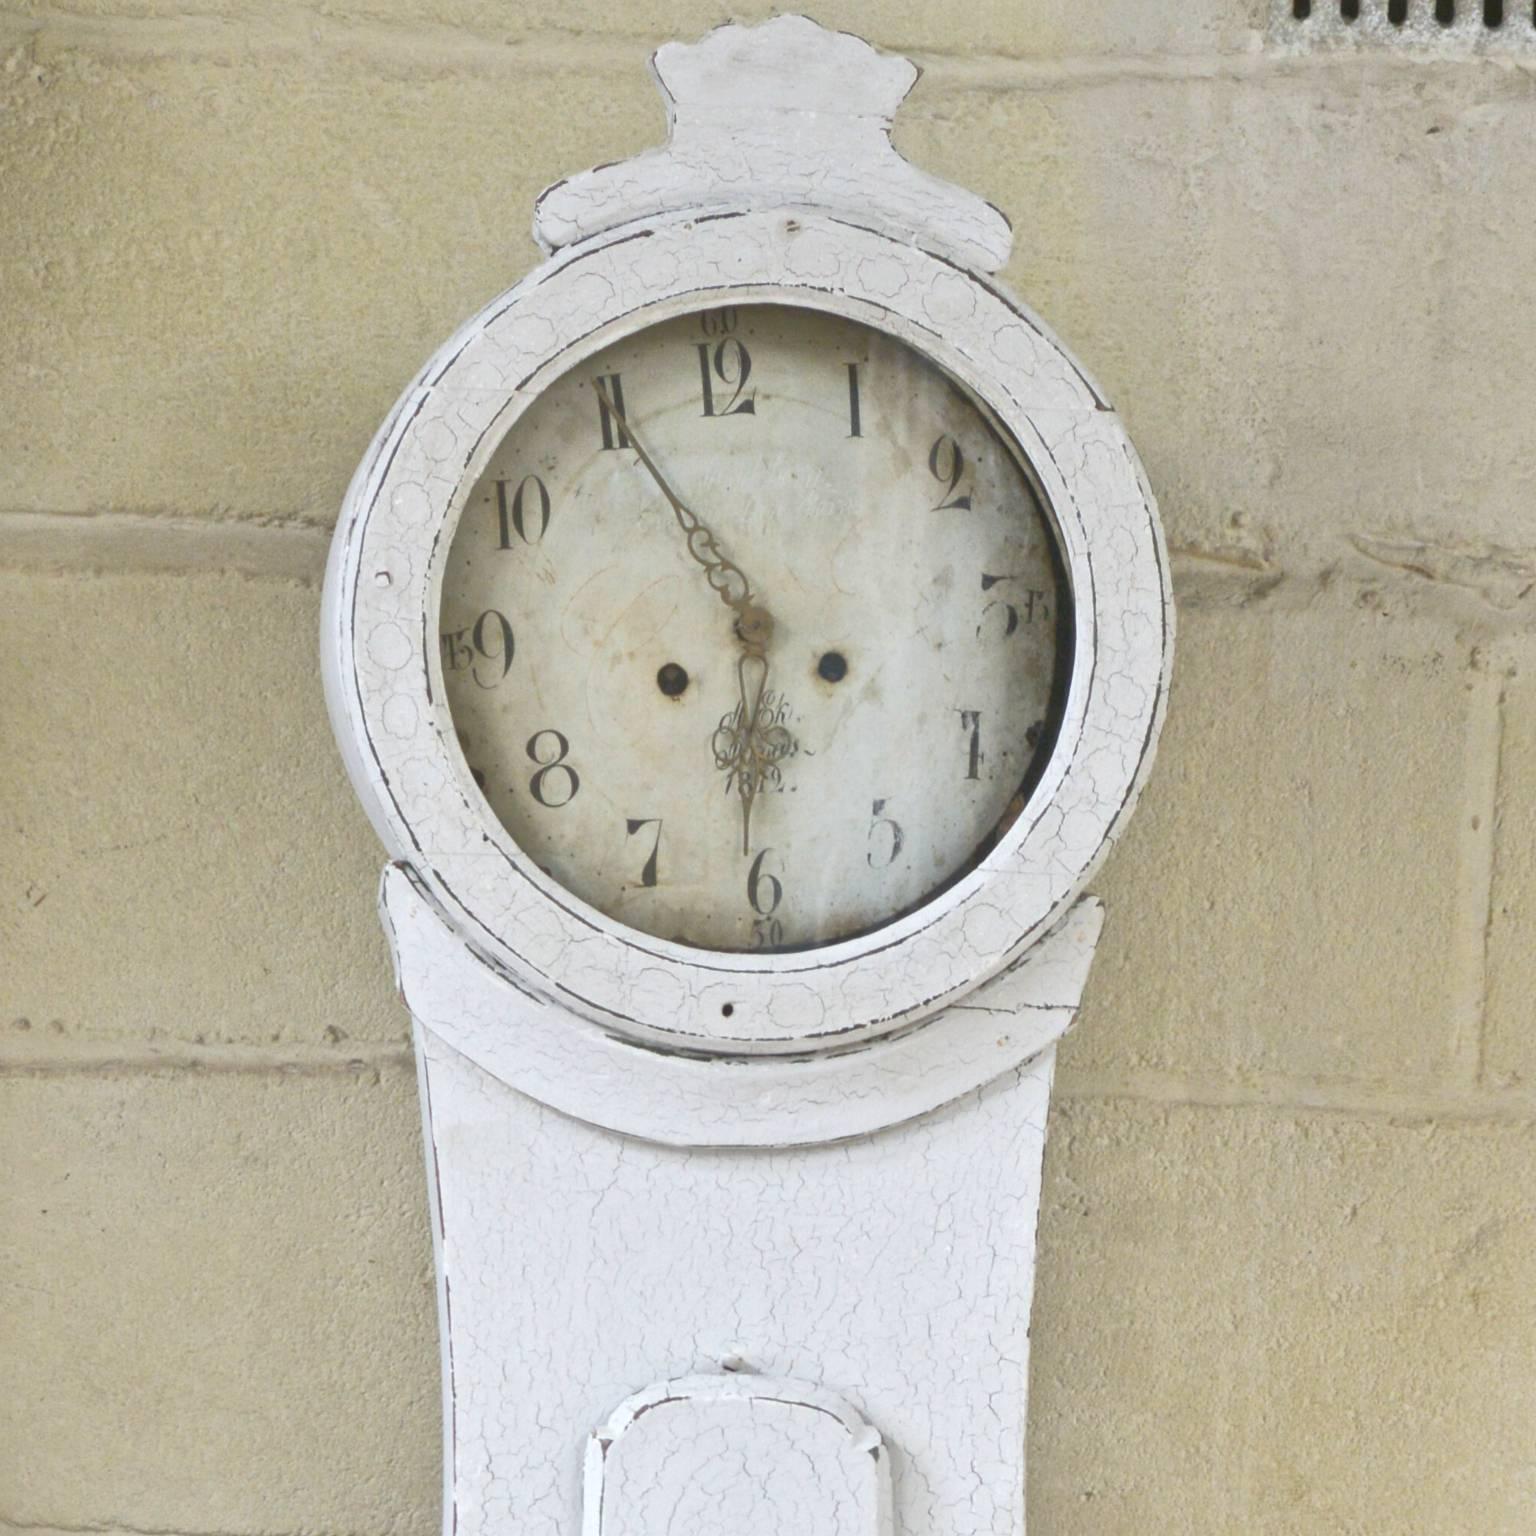 Classic country style 1800s antique Swedish Mora clock with later white paint that has developed a wonderful natural cracked patina to it and you can see earlier painted designs through the paint on the lower body.

This original 1800s Mora clock